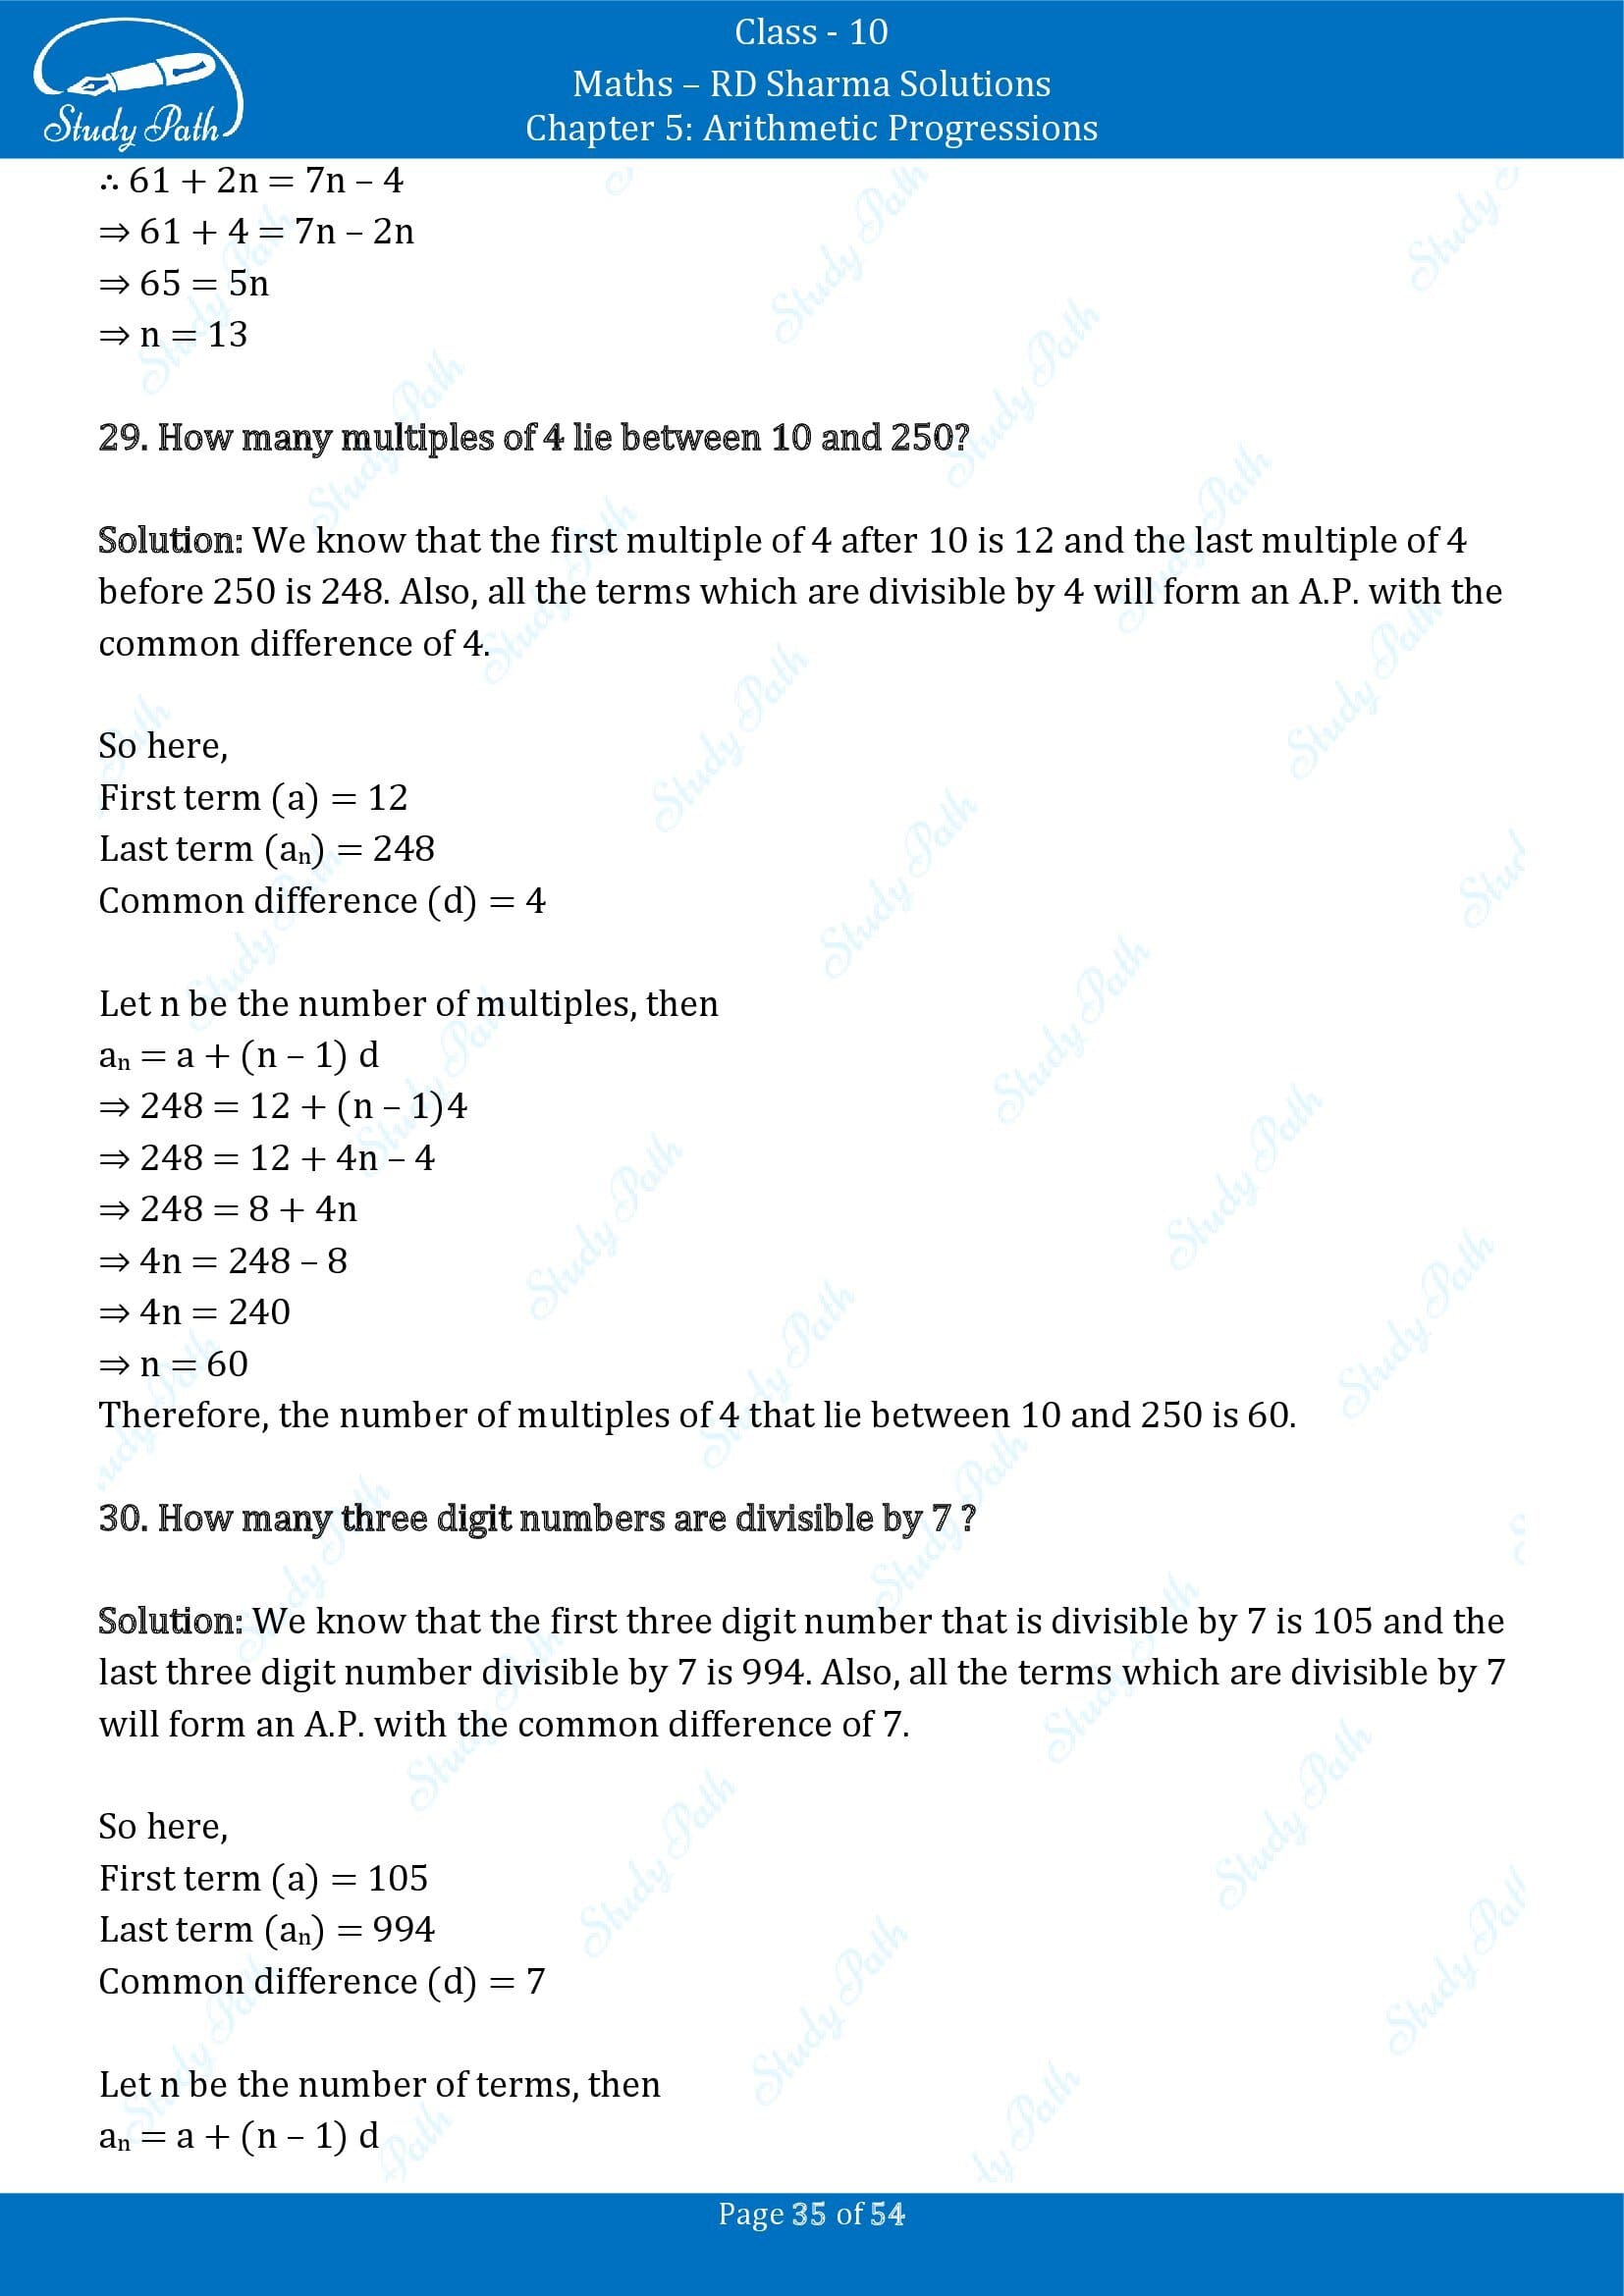 RD Sharma Solutions Class 10 Chapter 5 Arithmetic Progressions Exercise 5.4 00035